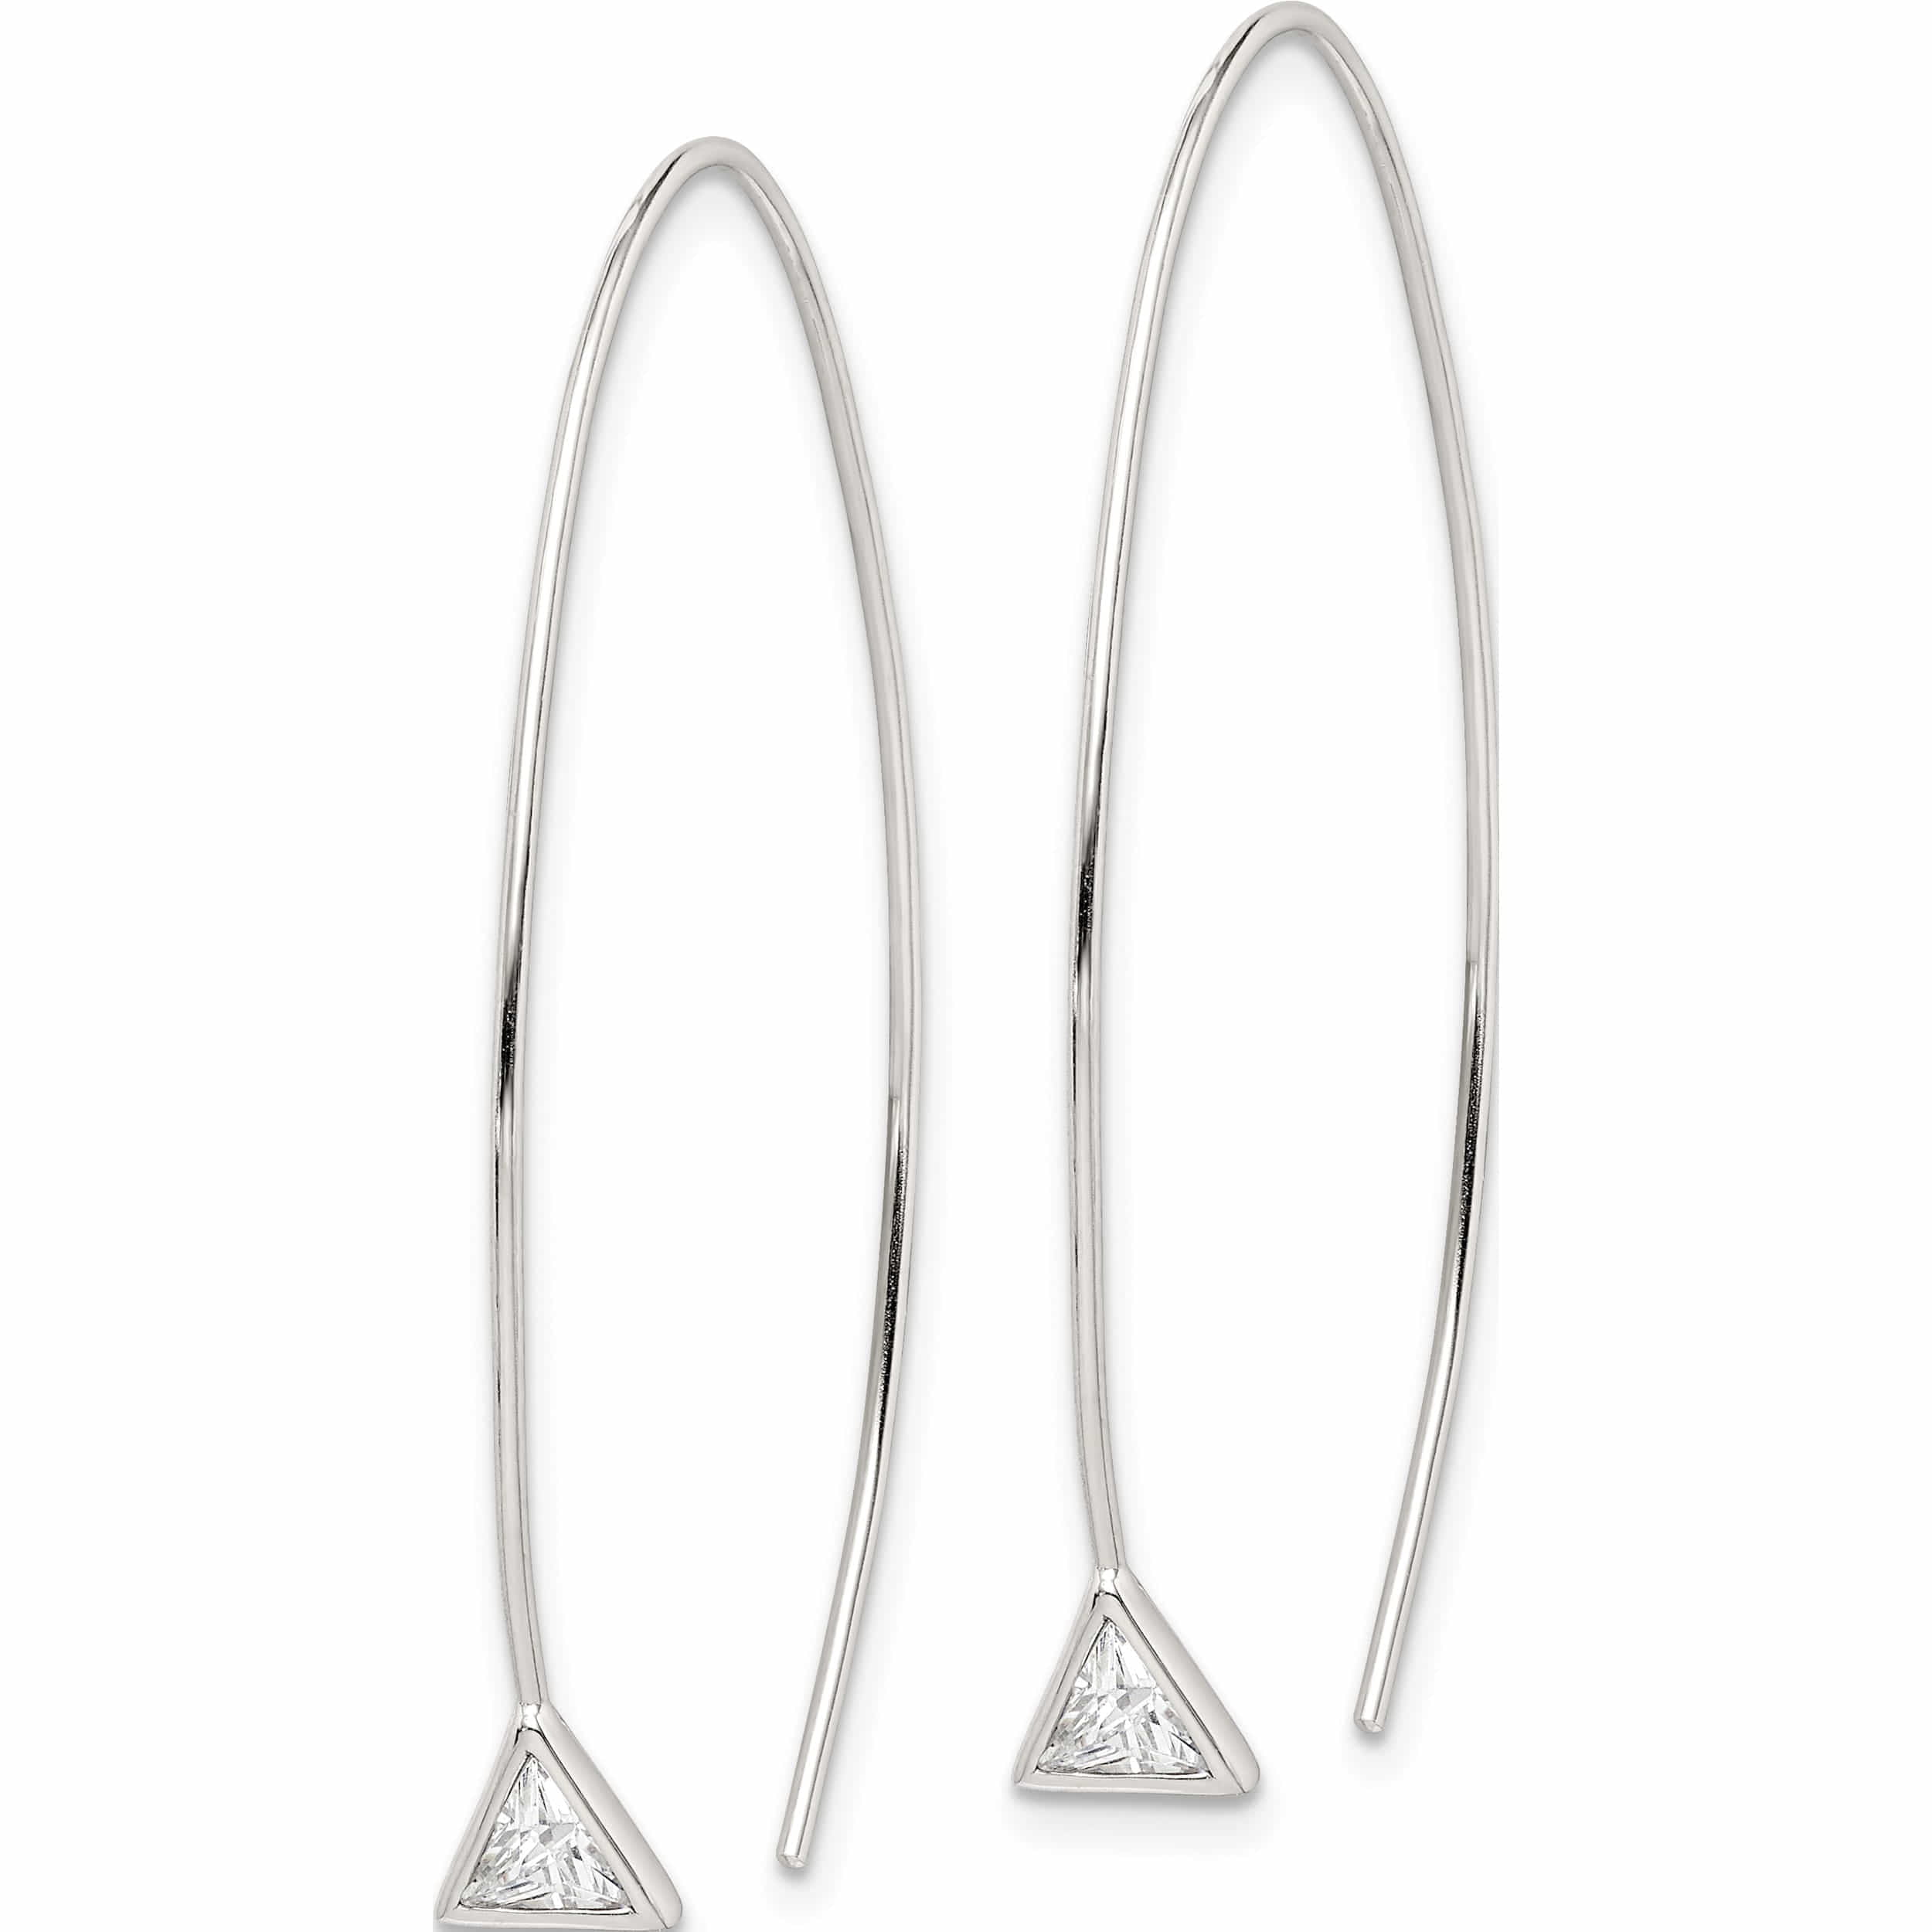 Details about   Sterling Silver Triangle CZ Threader Earrings MSRP $62